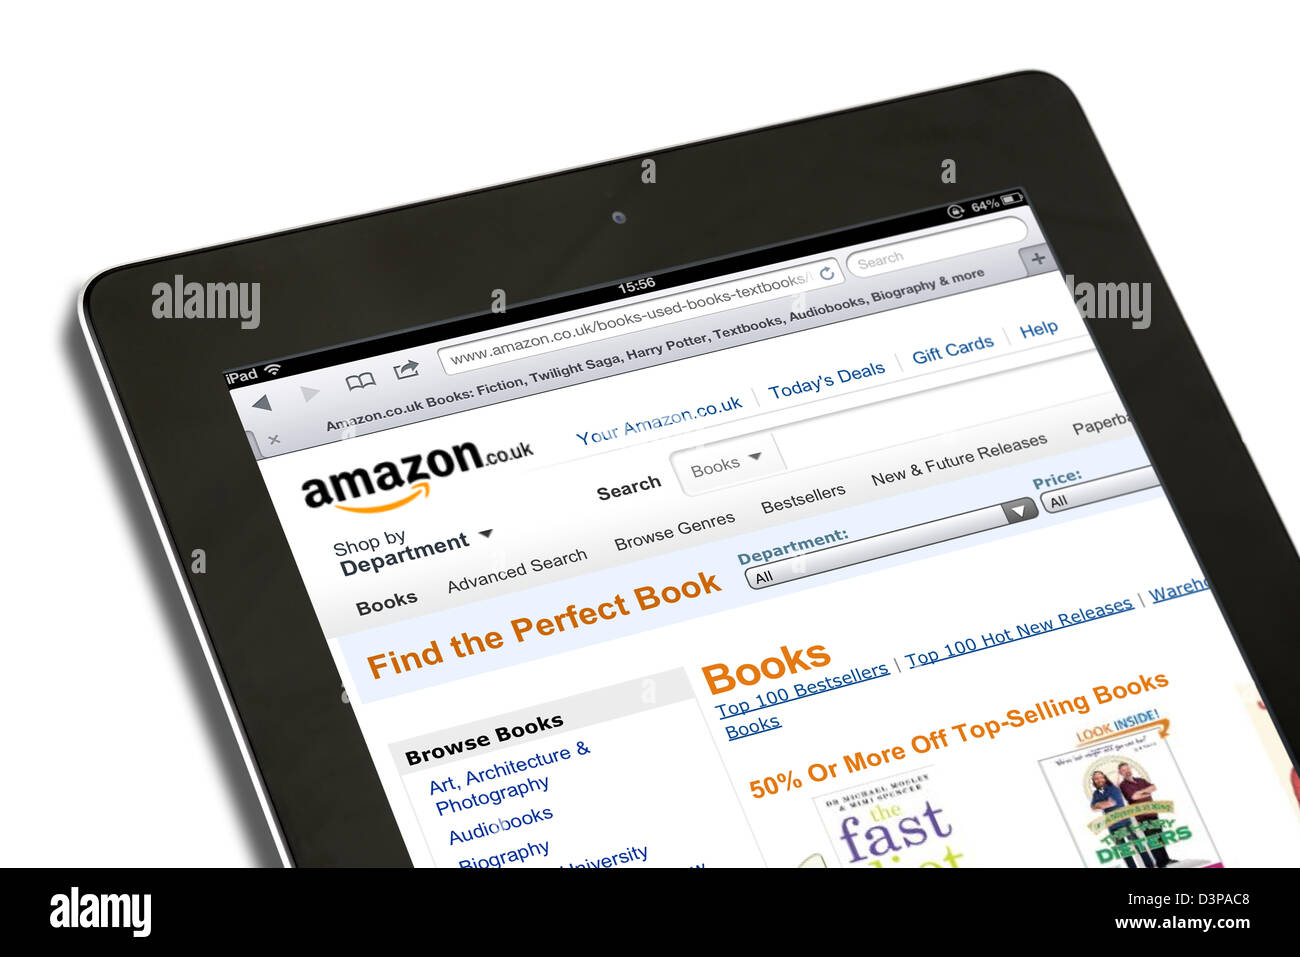 Shopping for books on the amazon.co.uk website on a 4th generation Apple iPad tablet computer Stock Photo